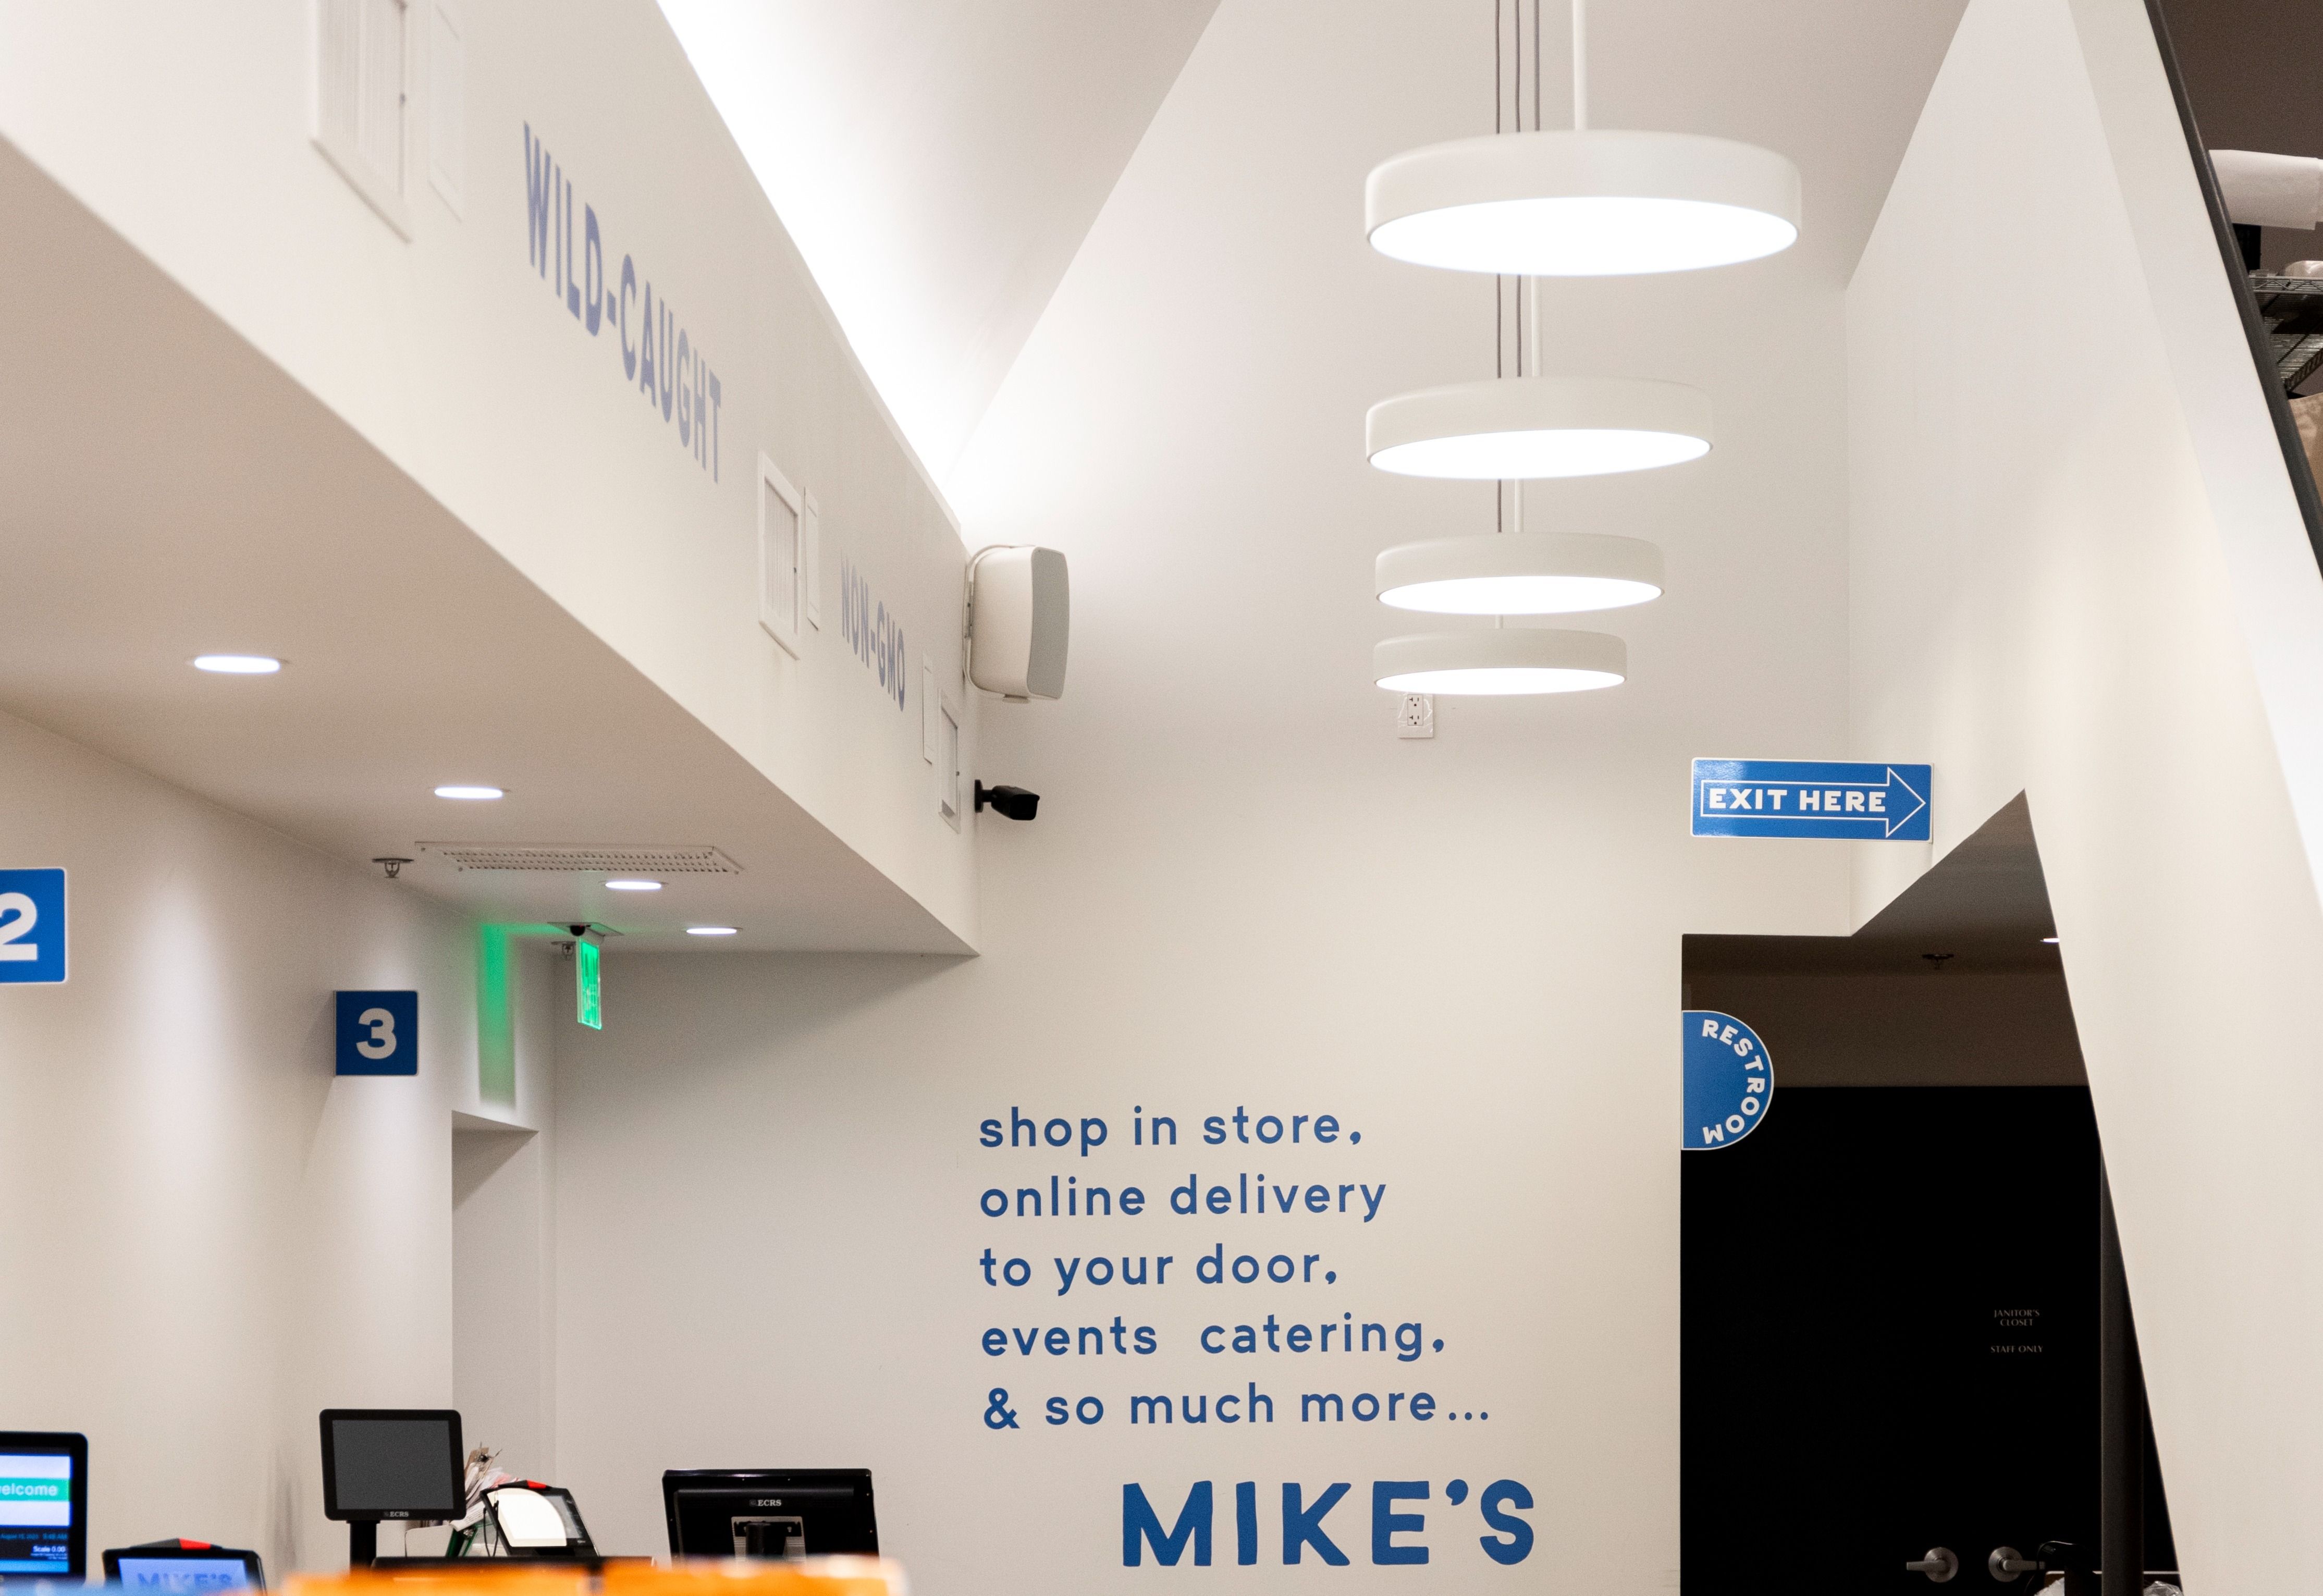 White round panel pendant lights suspended from a sloped ceiling on a white stem mounting, providing the customer clarity in wayfinding from the grocery store entrance. 